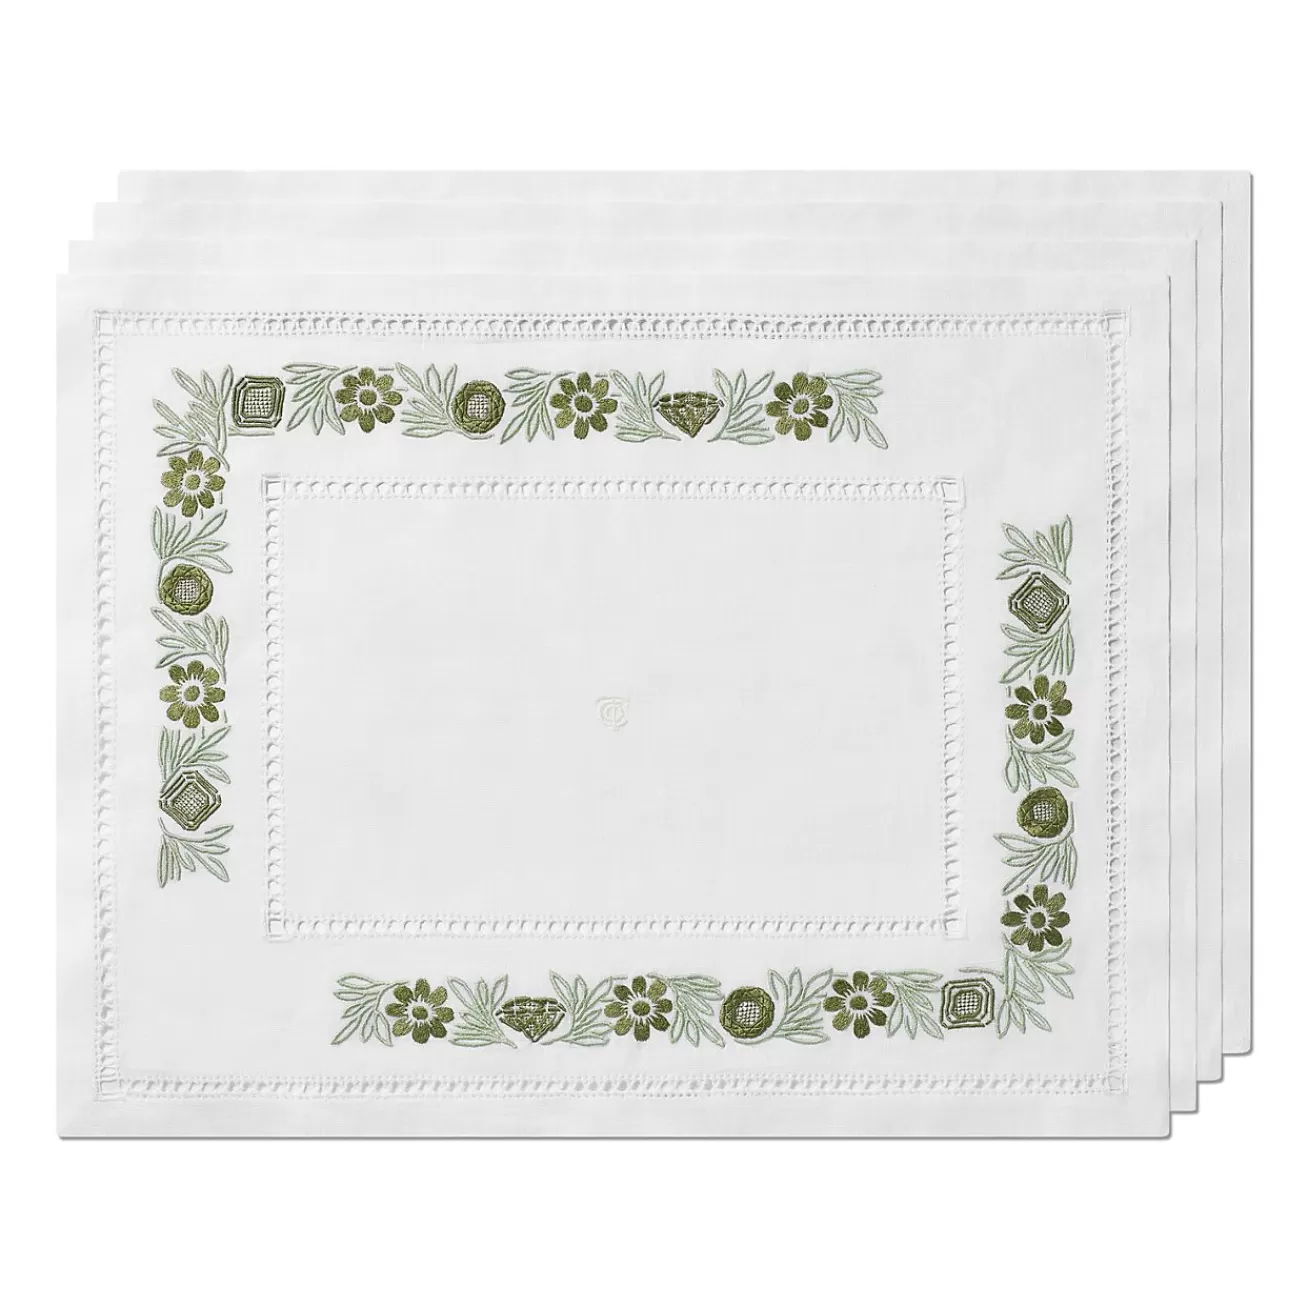 Tiffany & Co. Tiffany Heritage Place Mats Set of Four, in Jade Green Linen | ^ Table Linens